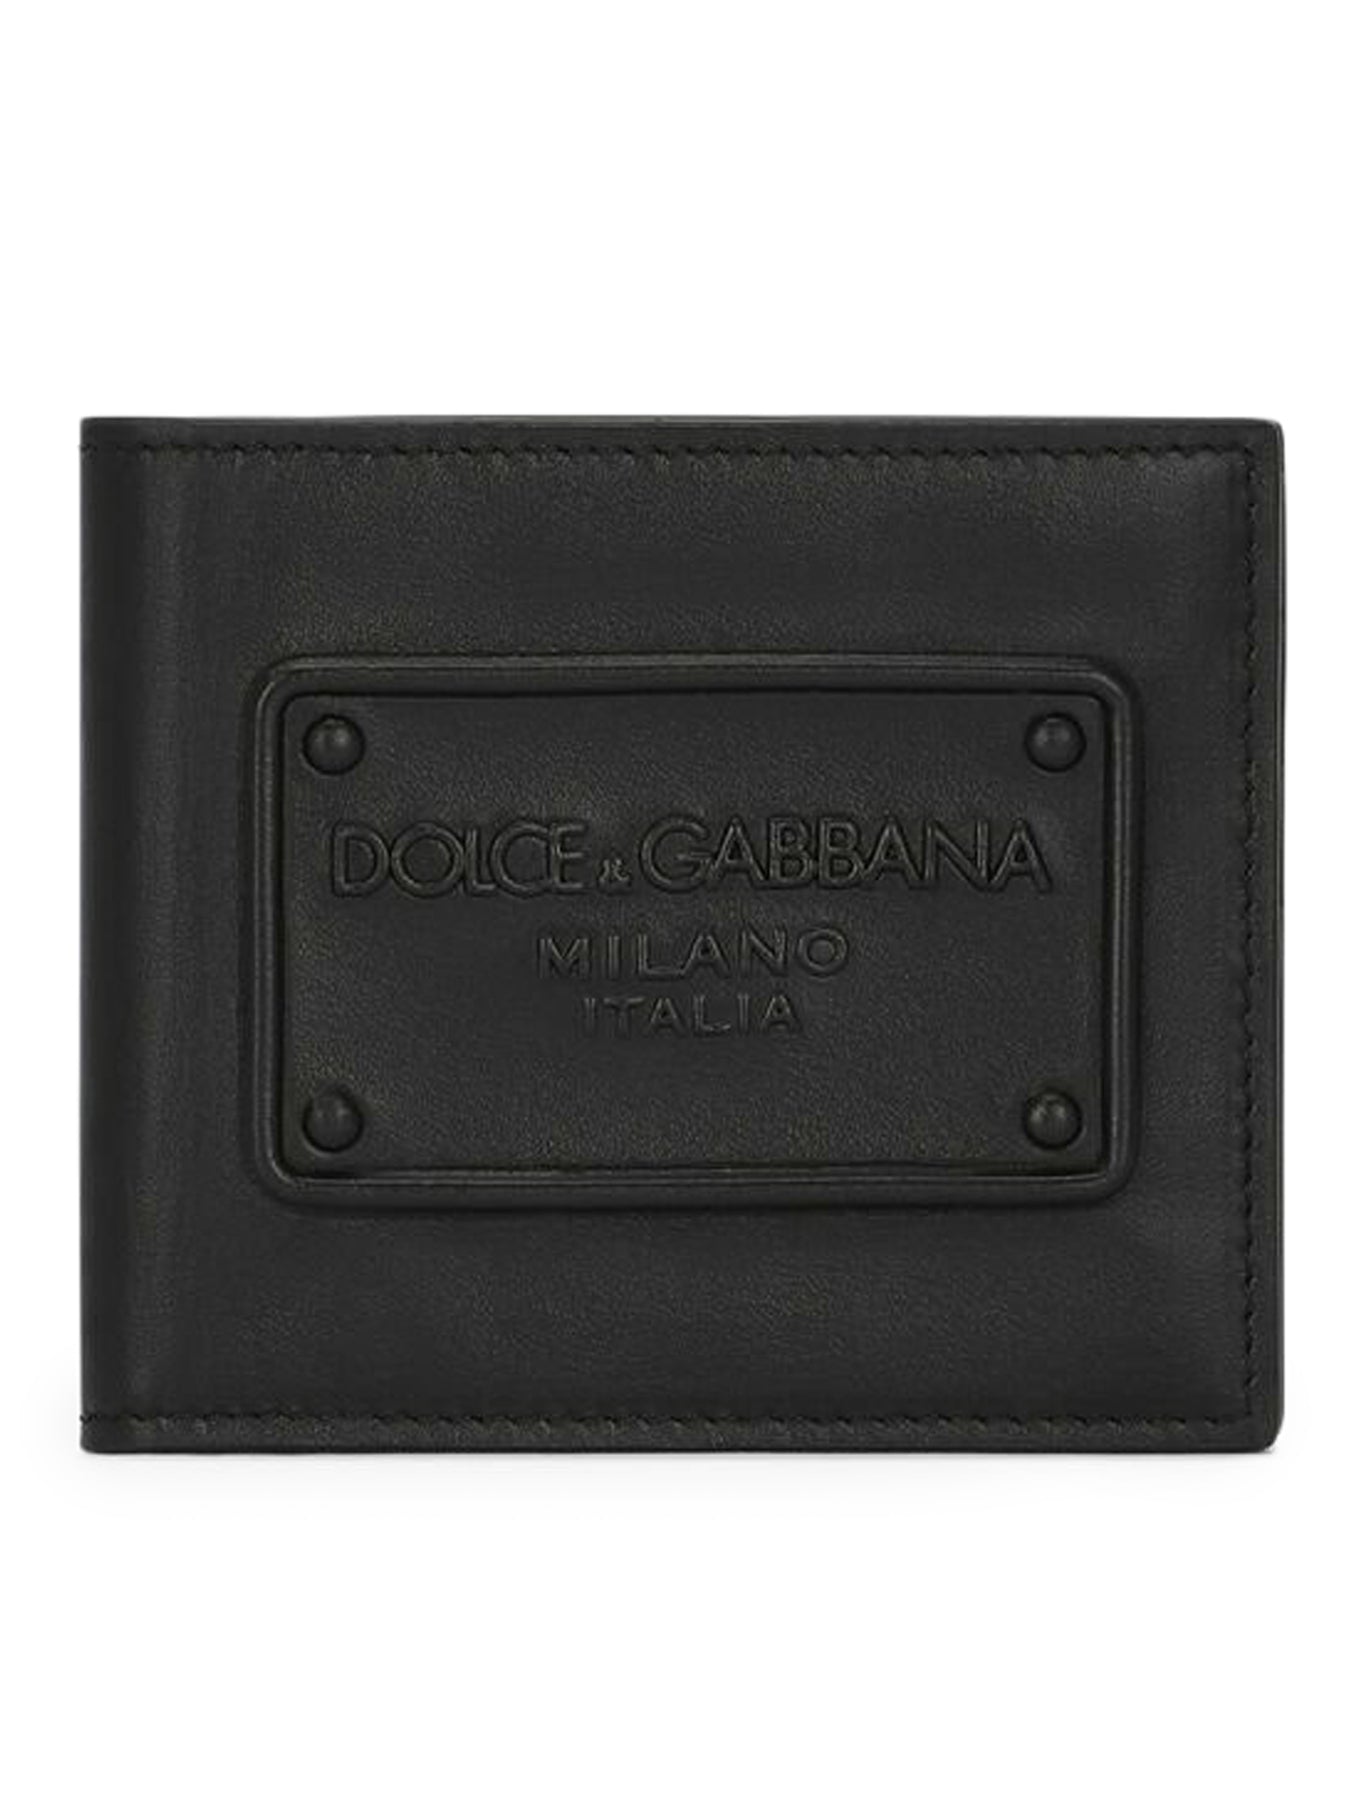 Bifold wallet in calfskin with embossed logo